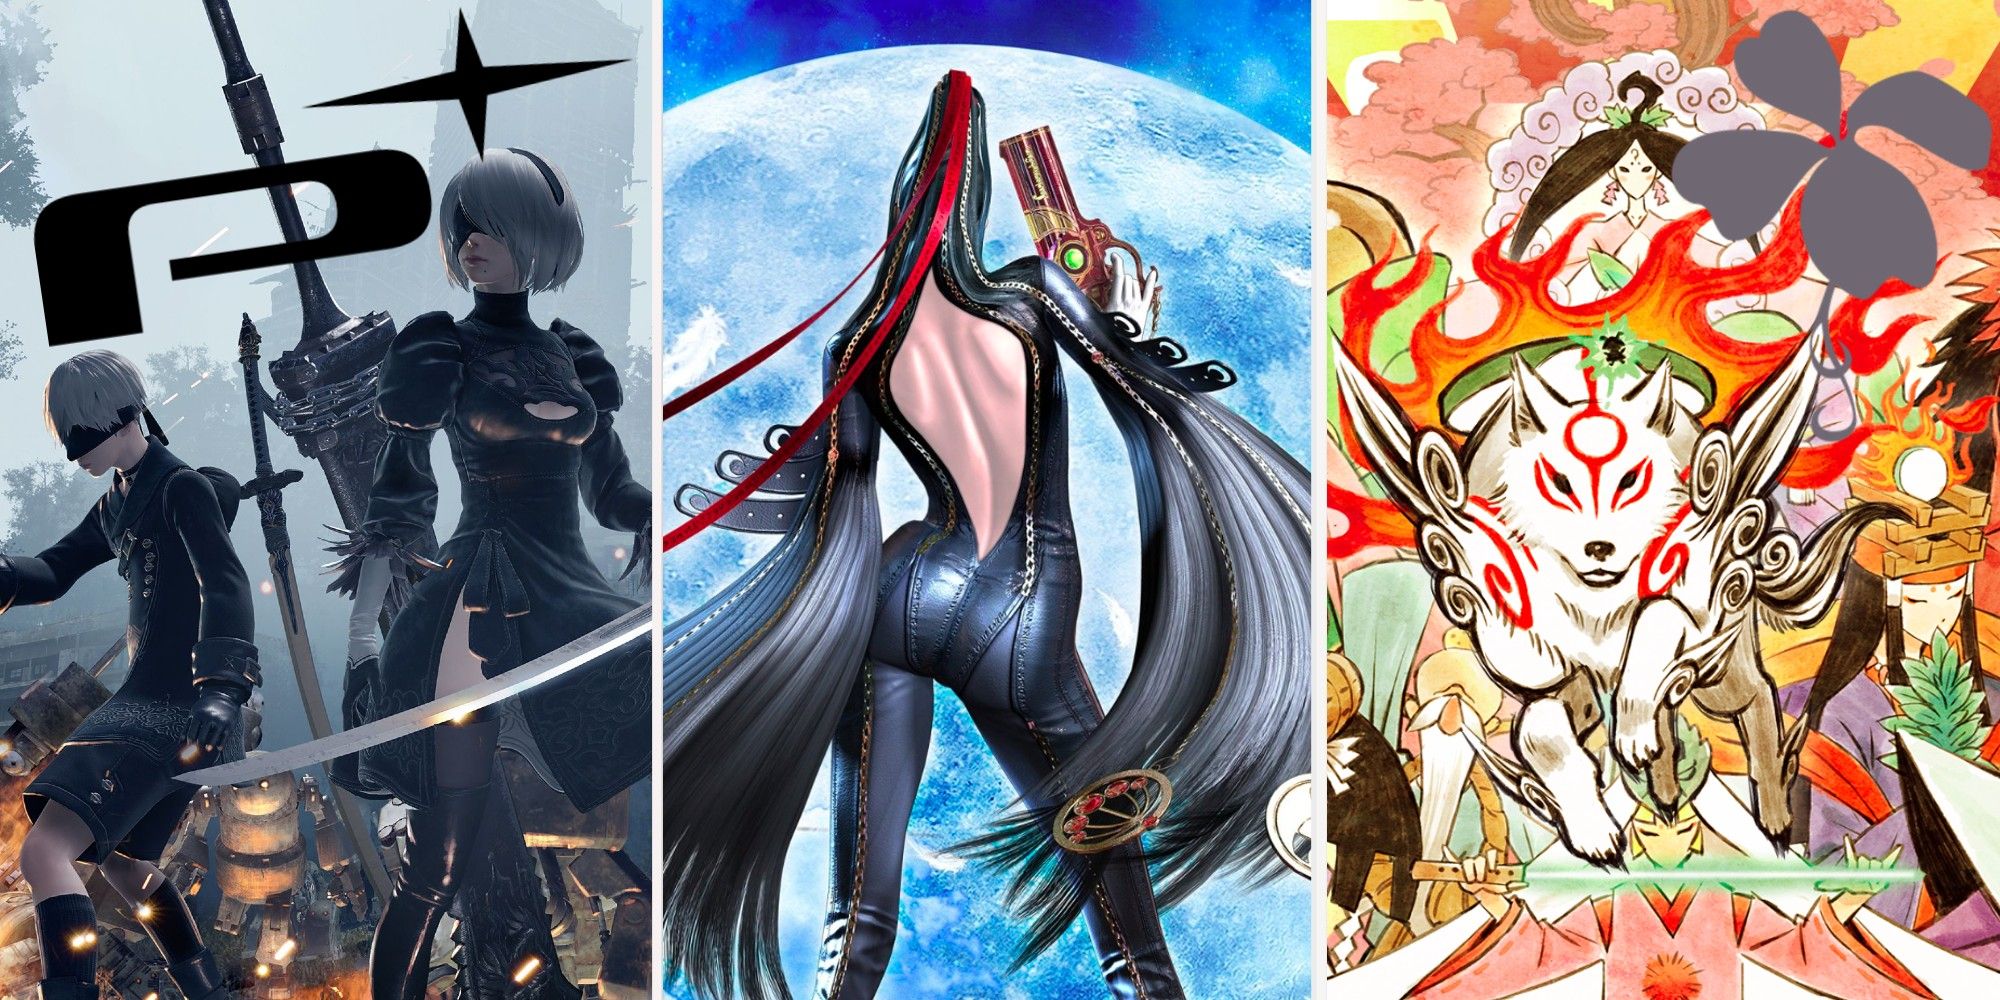 Best Clover and Platnium games featured Image - Nier Automata, Bayonetta, and Okami